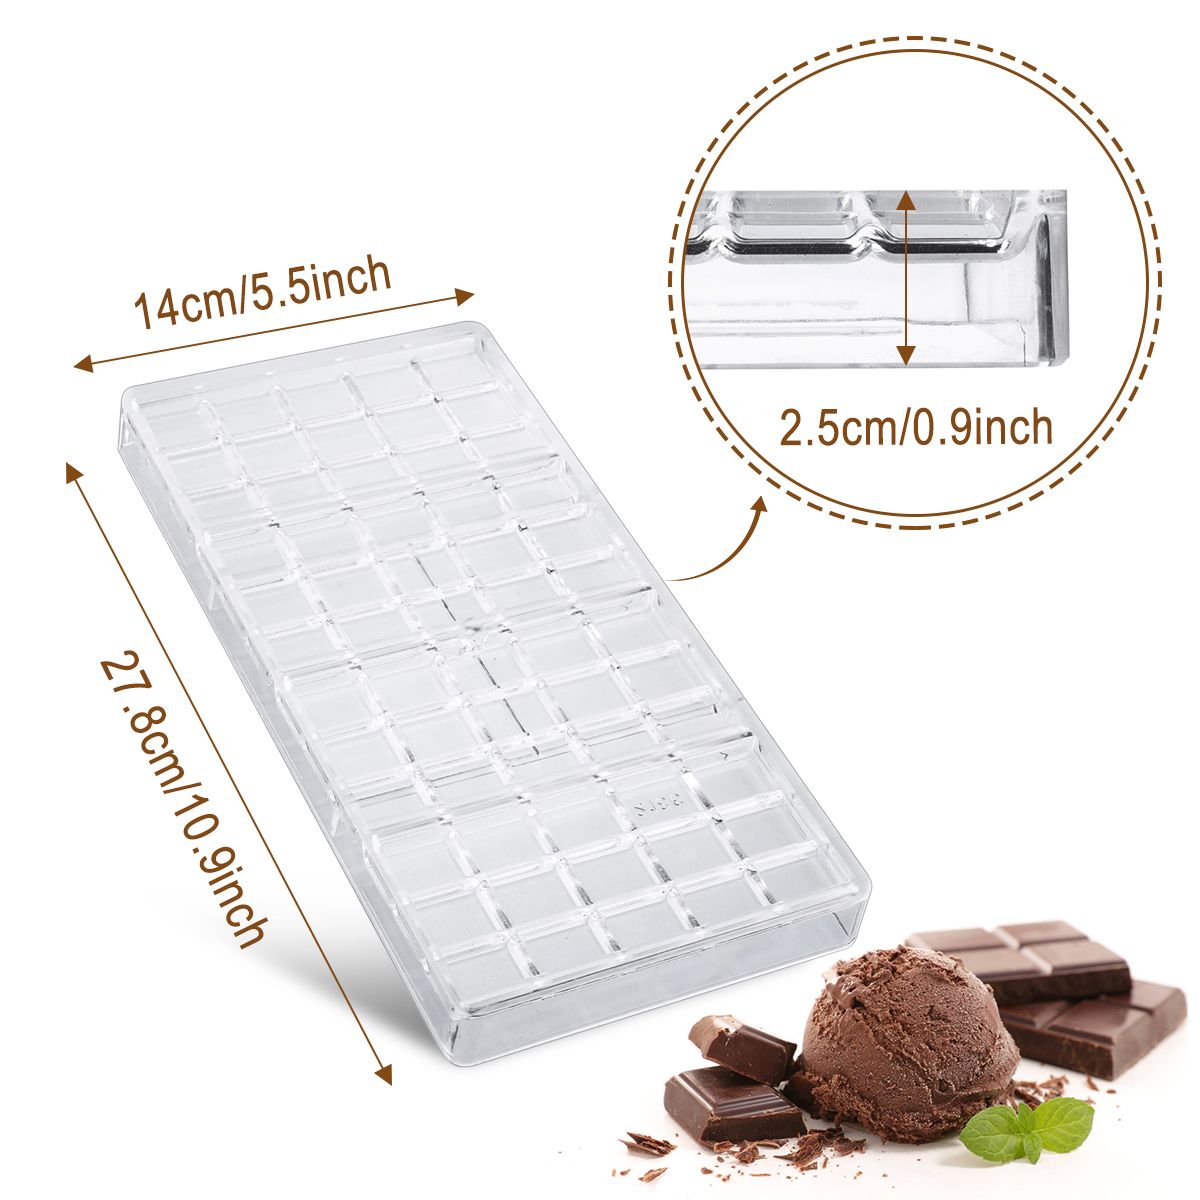 Chocolate-Bar-Mold-Eco-friendly-Plastic-Baking-Pastry-Mould-Cozinha-Kitchen-Tool-1132064